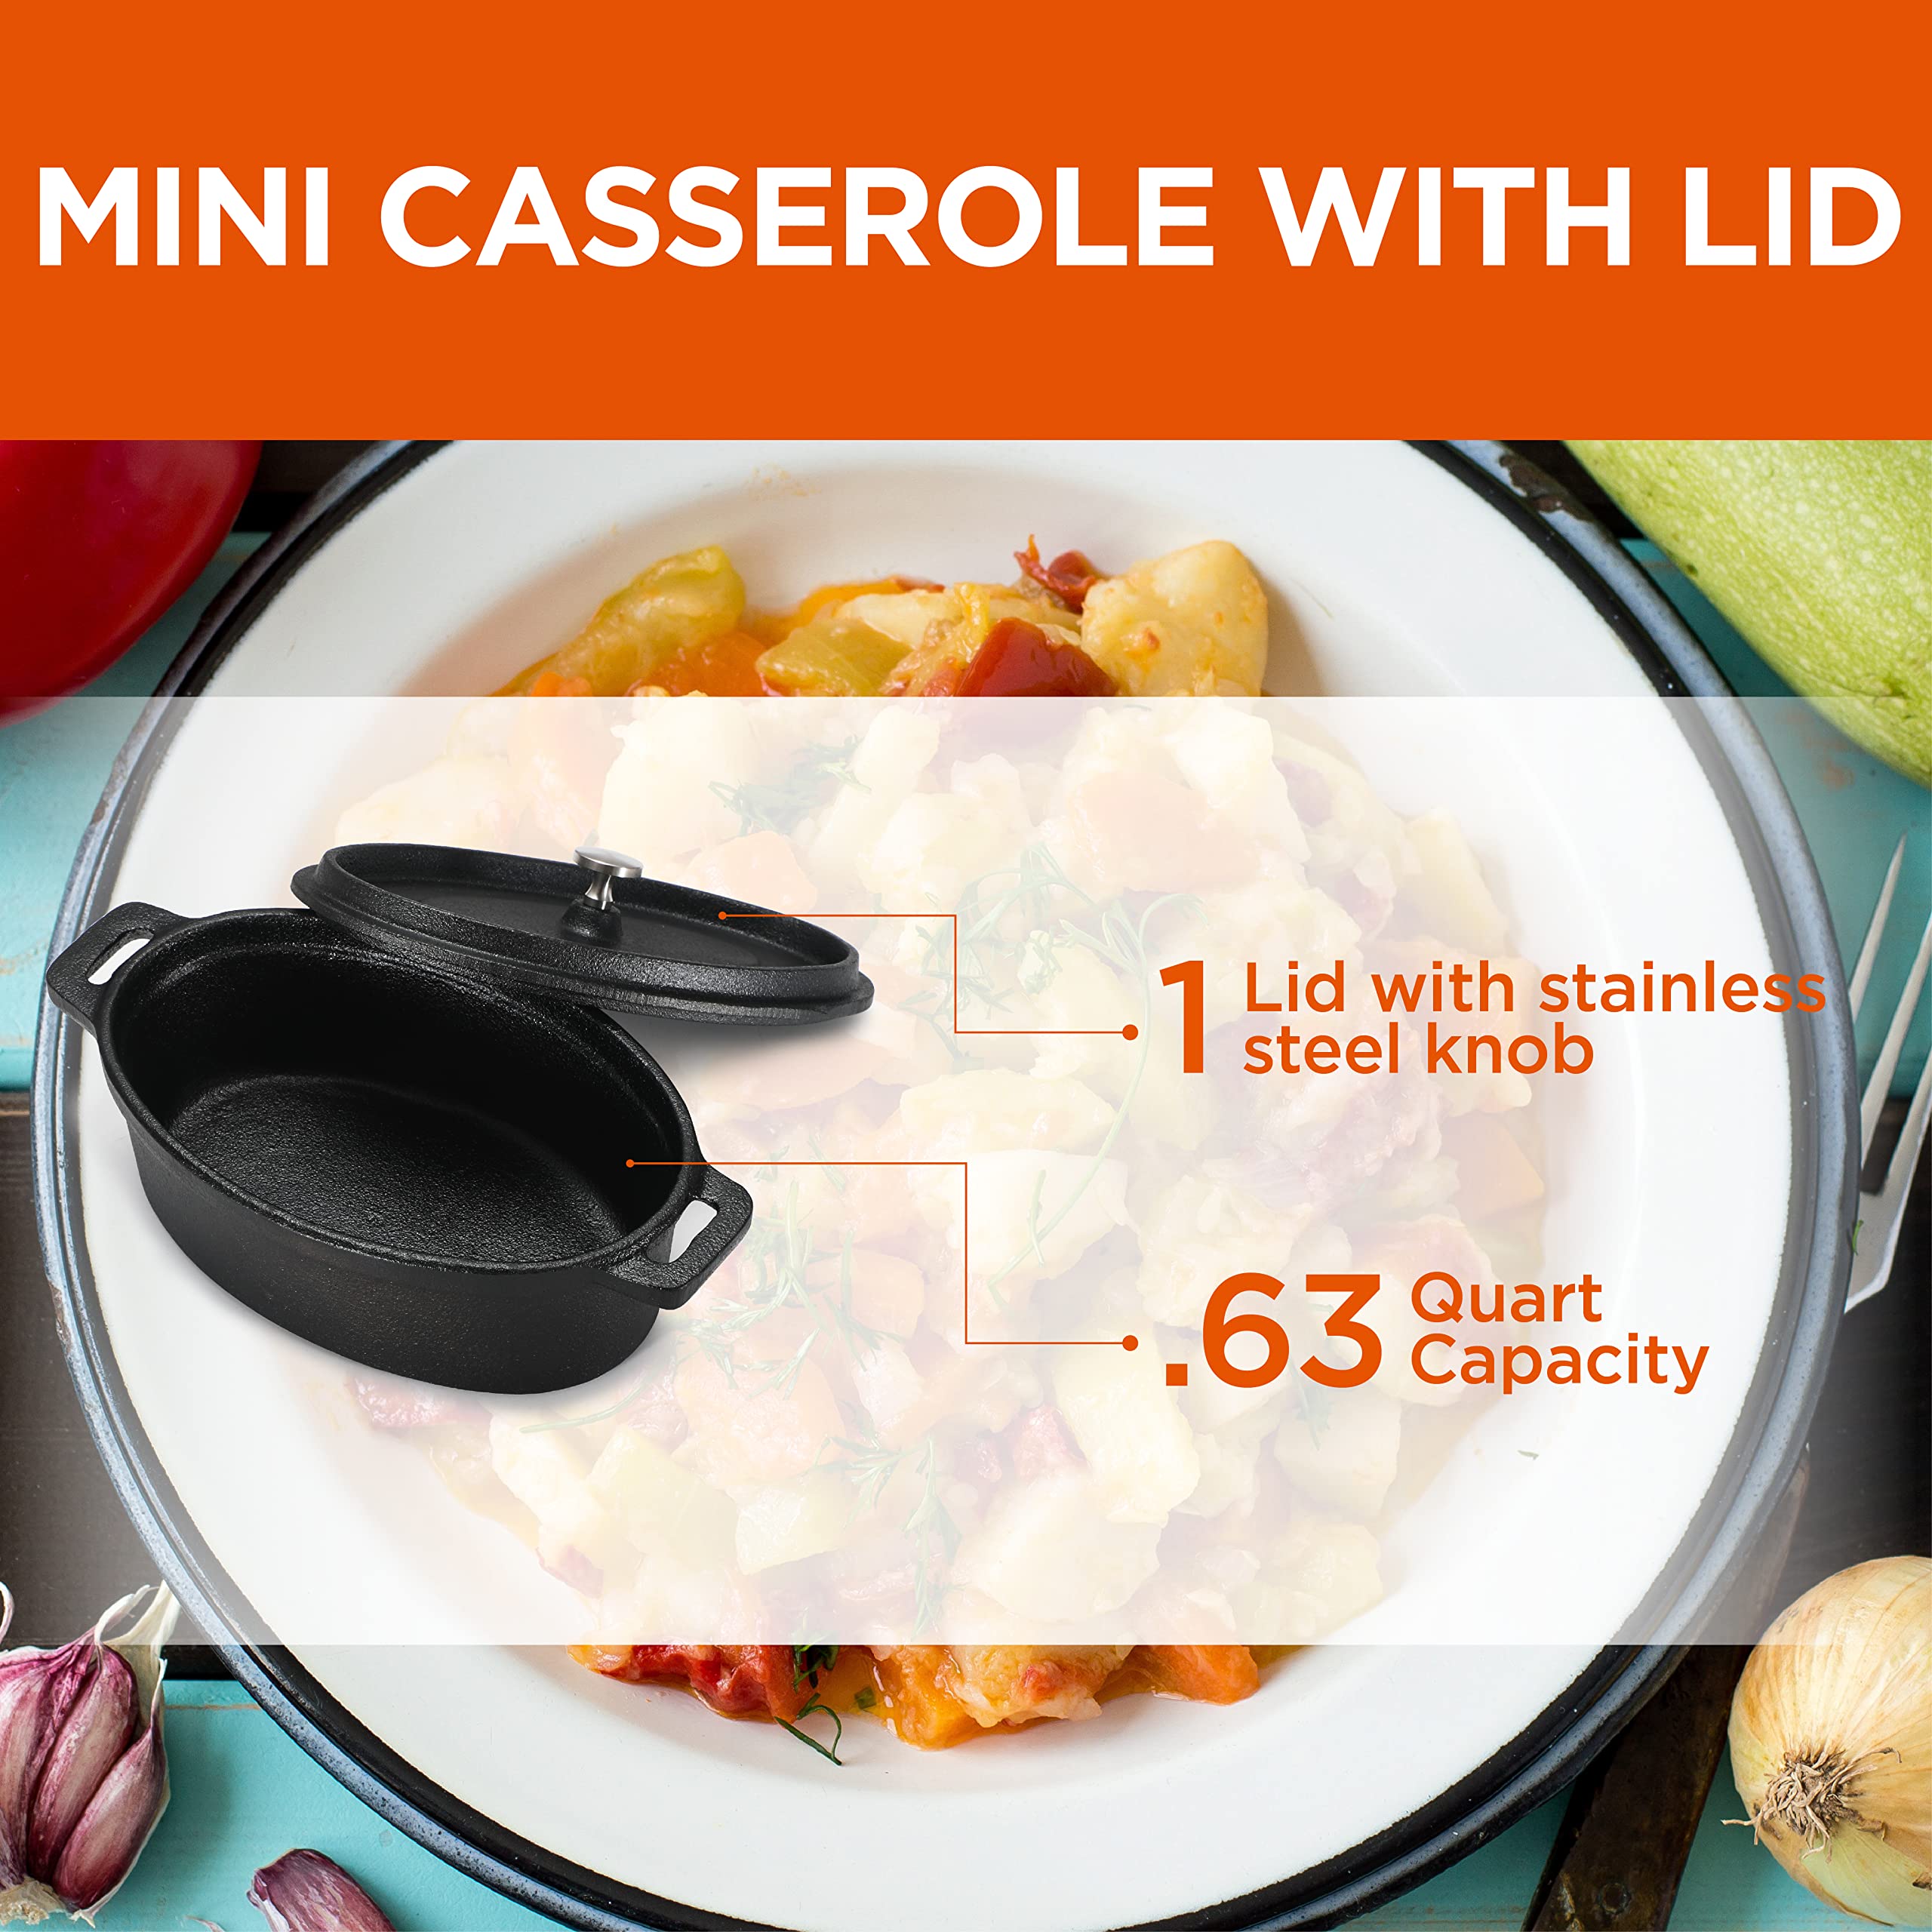 COMMERCIAL CHEF Mini Casserole Dish with Lid, 0.63 Qt. Cast Iron Casserole Dish for Baking, Cast Iron Cookware Mini Dutch Oven Ramekin with Handles & Stainless Steel Knob